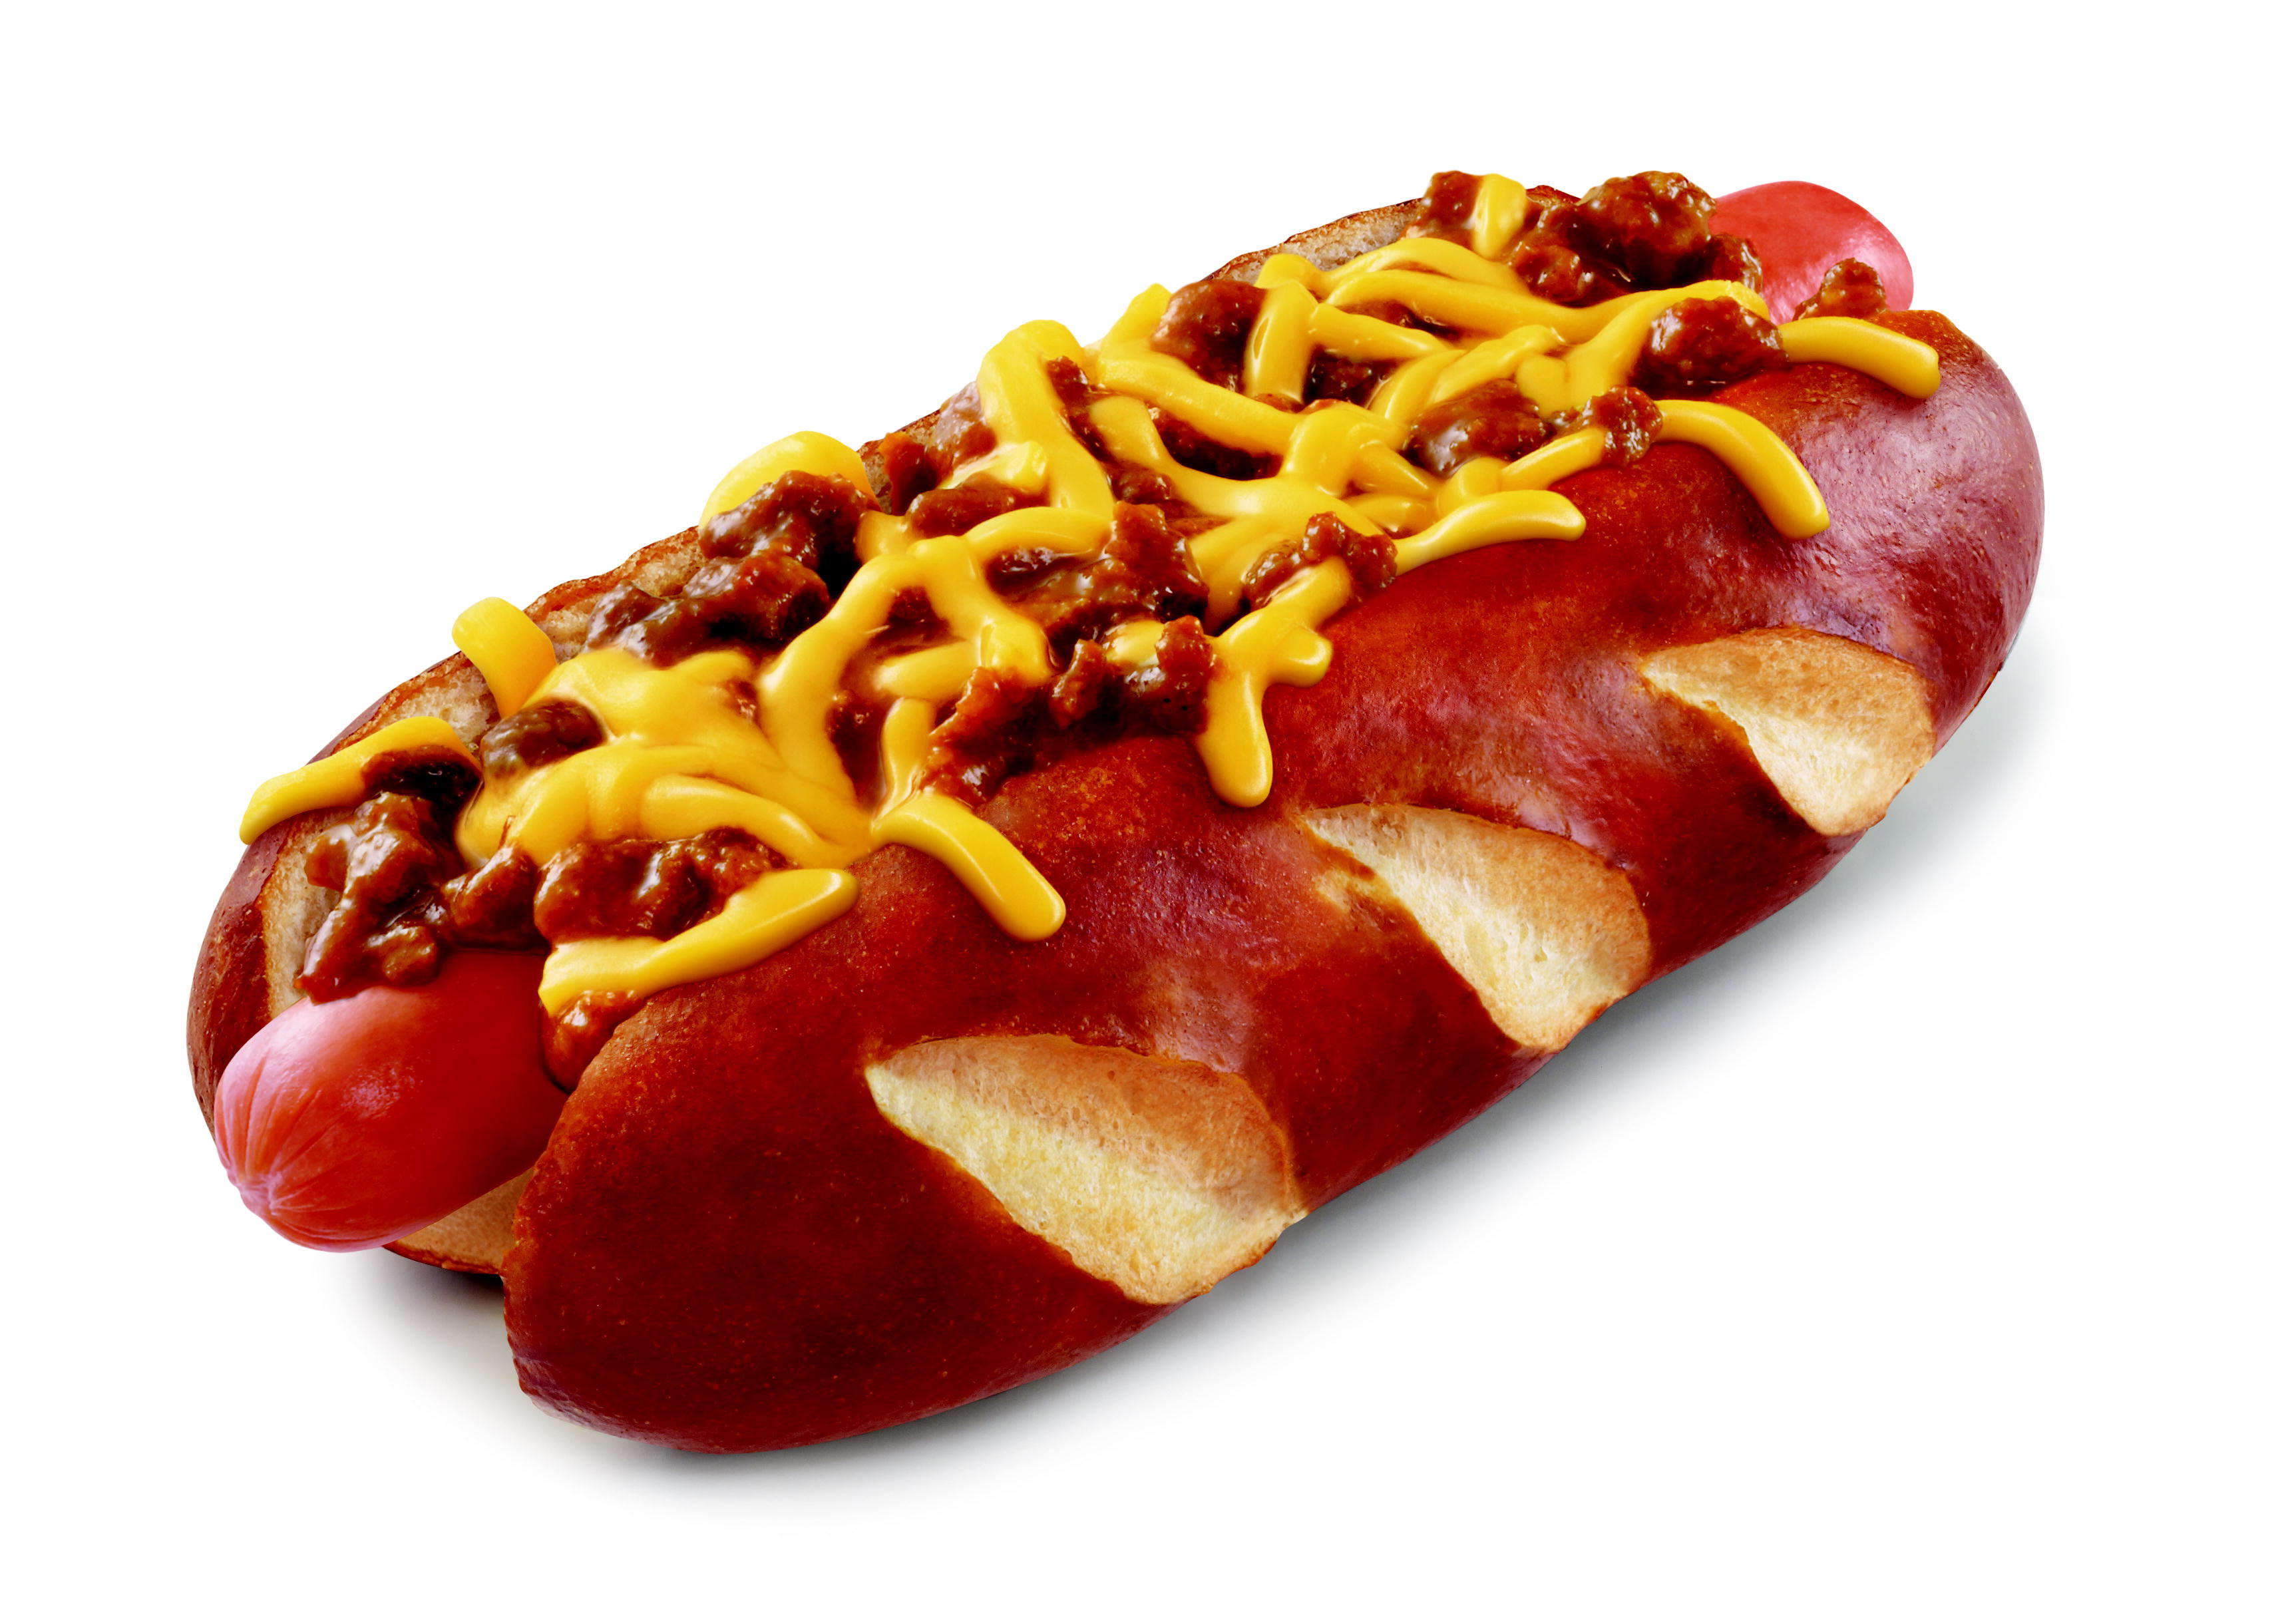 SONIC Announces the Return of Pretzel Dogs - With a Twist.